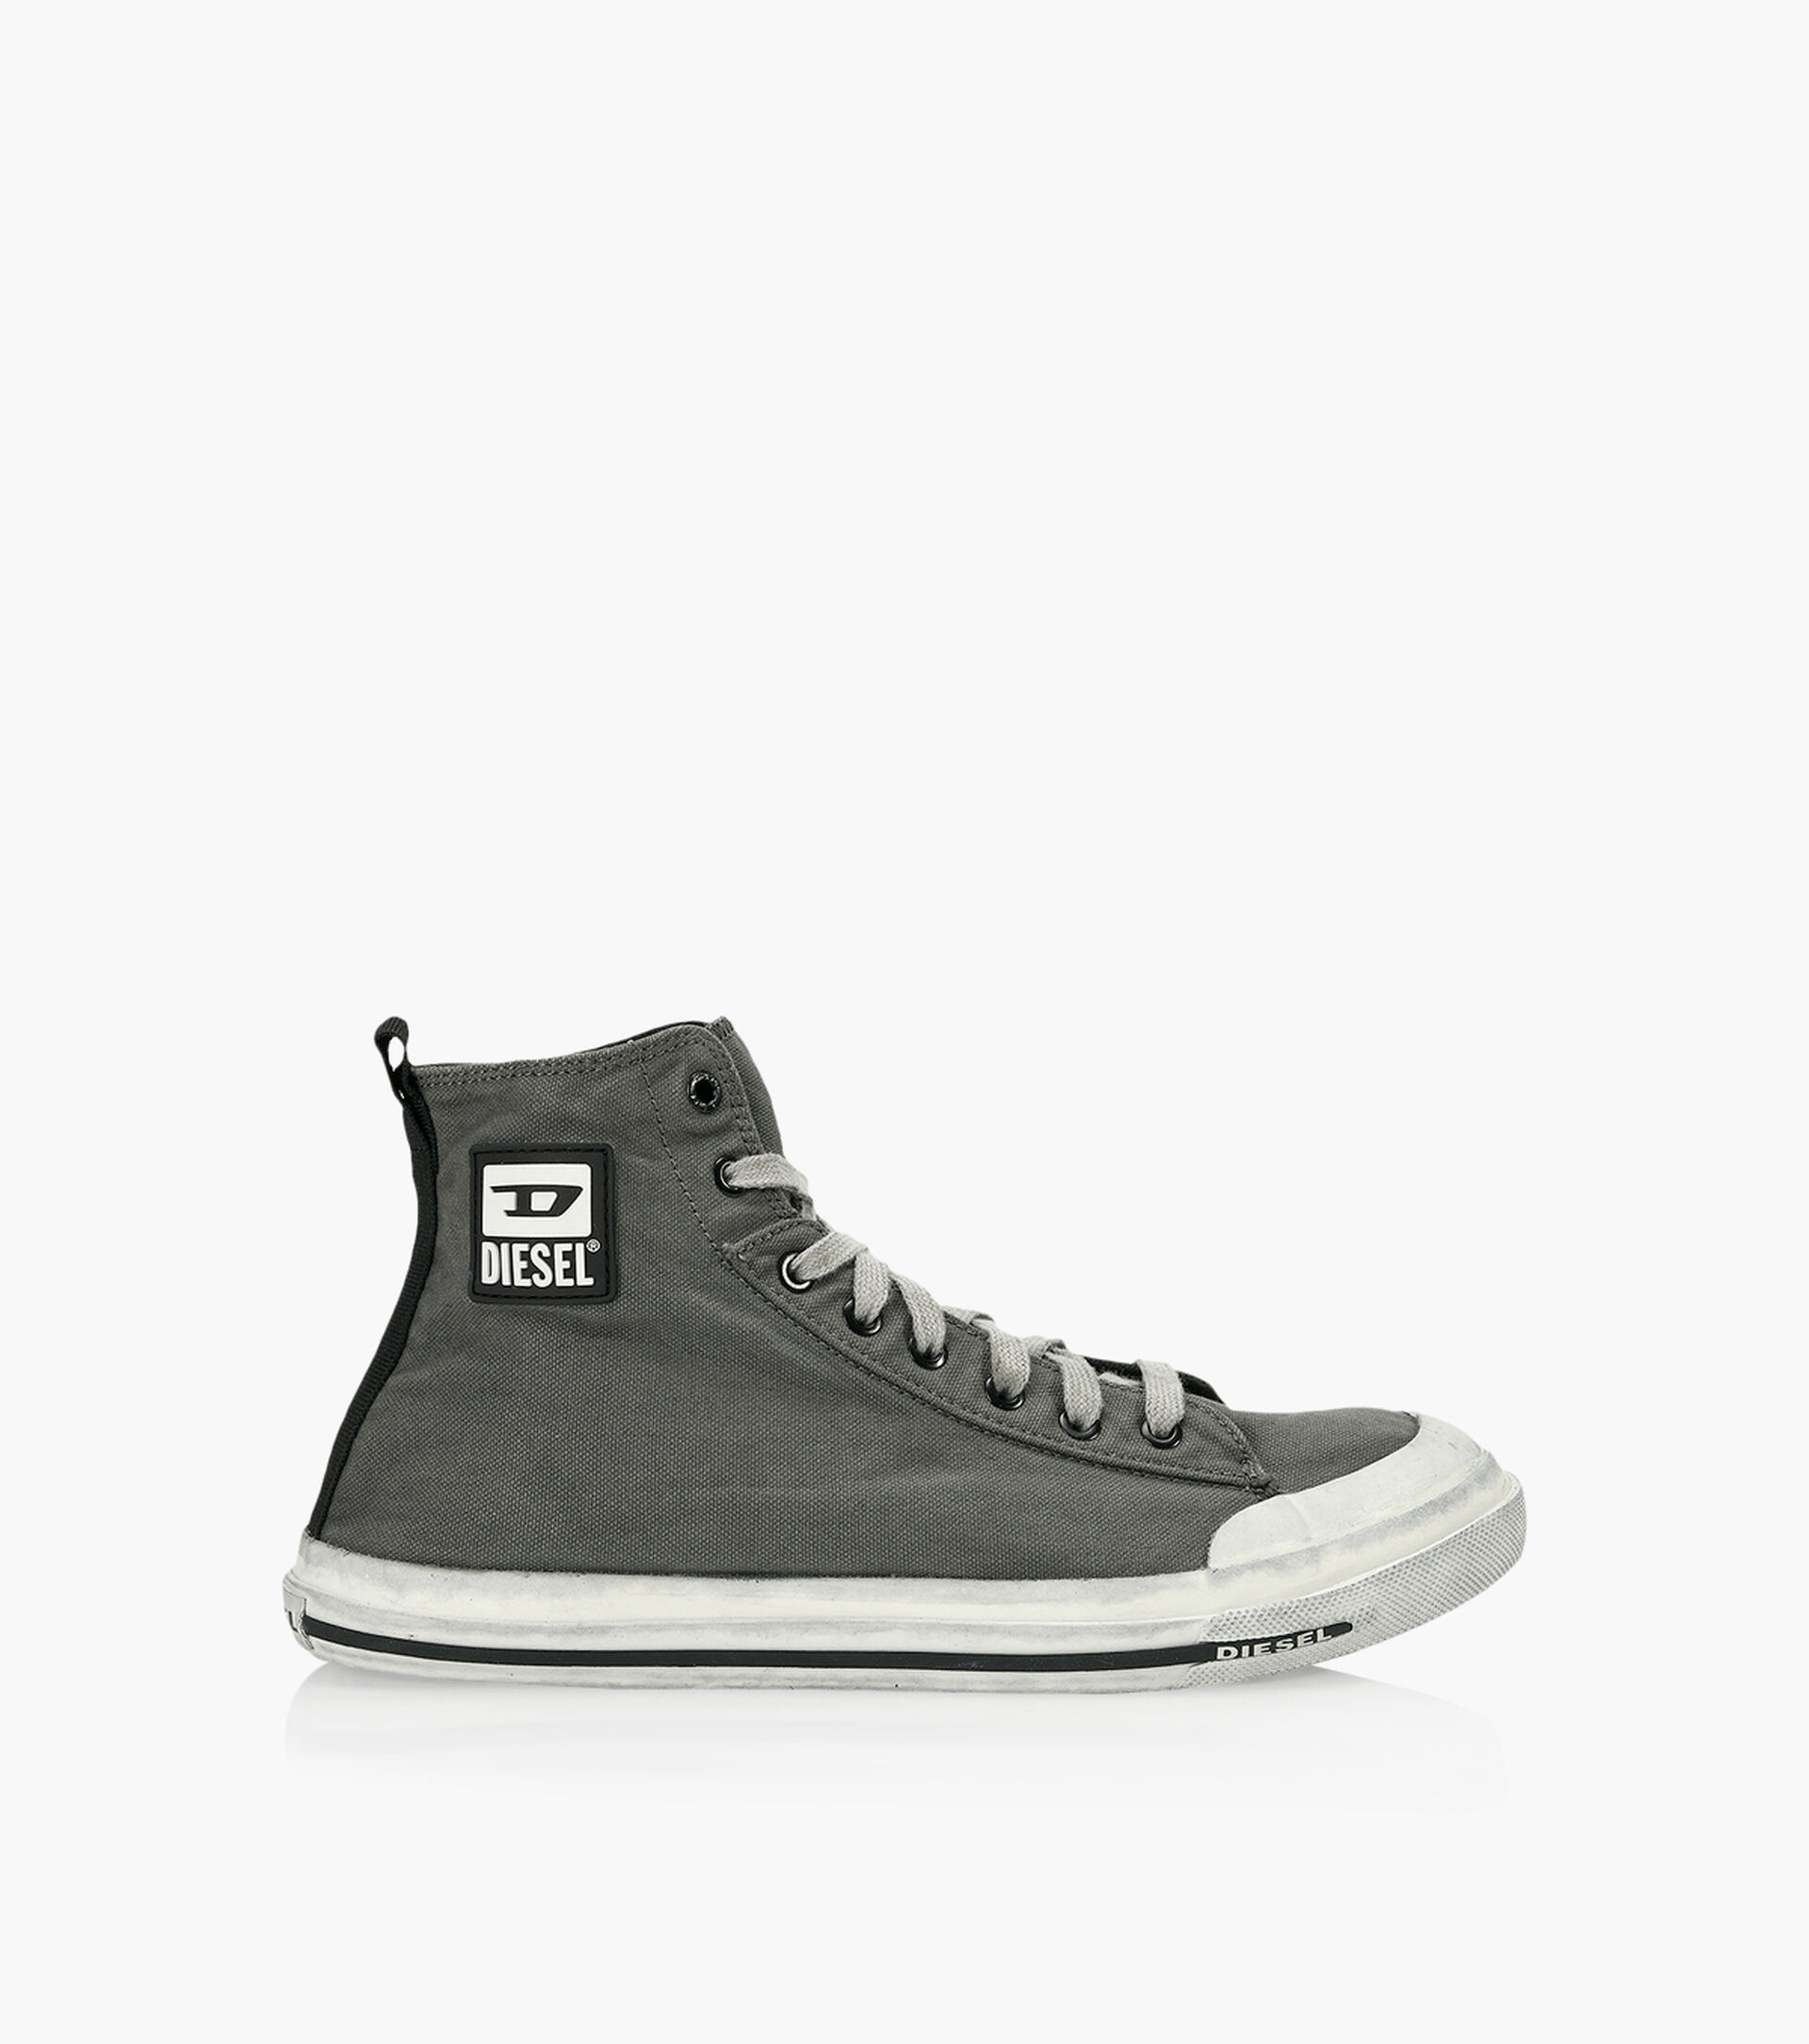 DIESEL S ASTICO MID-CUT - Fabric | Browns Shoes